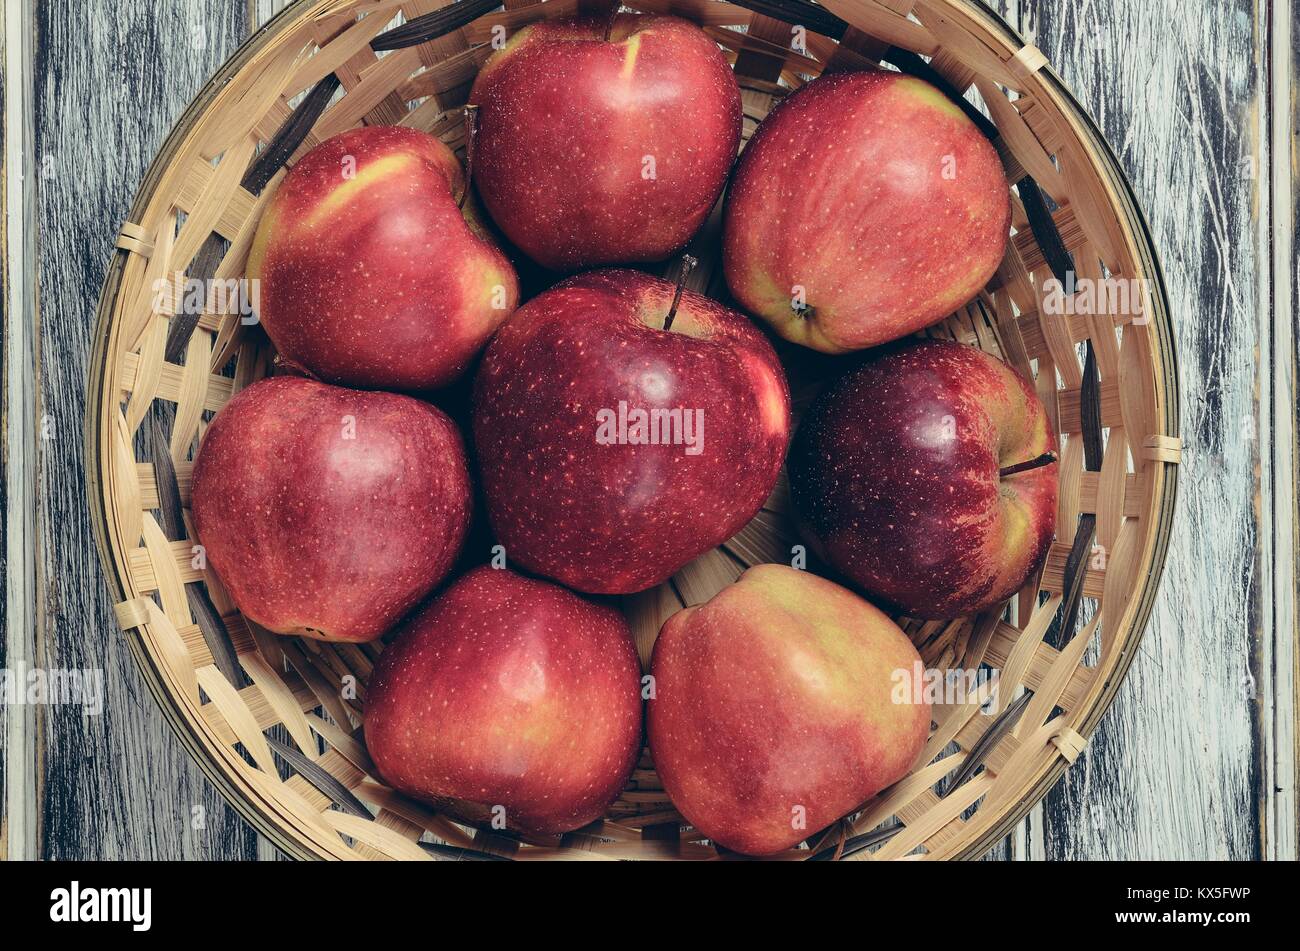 Fresh red apples. Natural apples in a wicker basket. Stock Photo